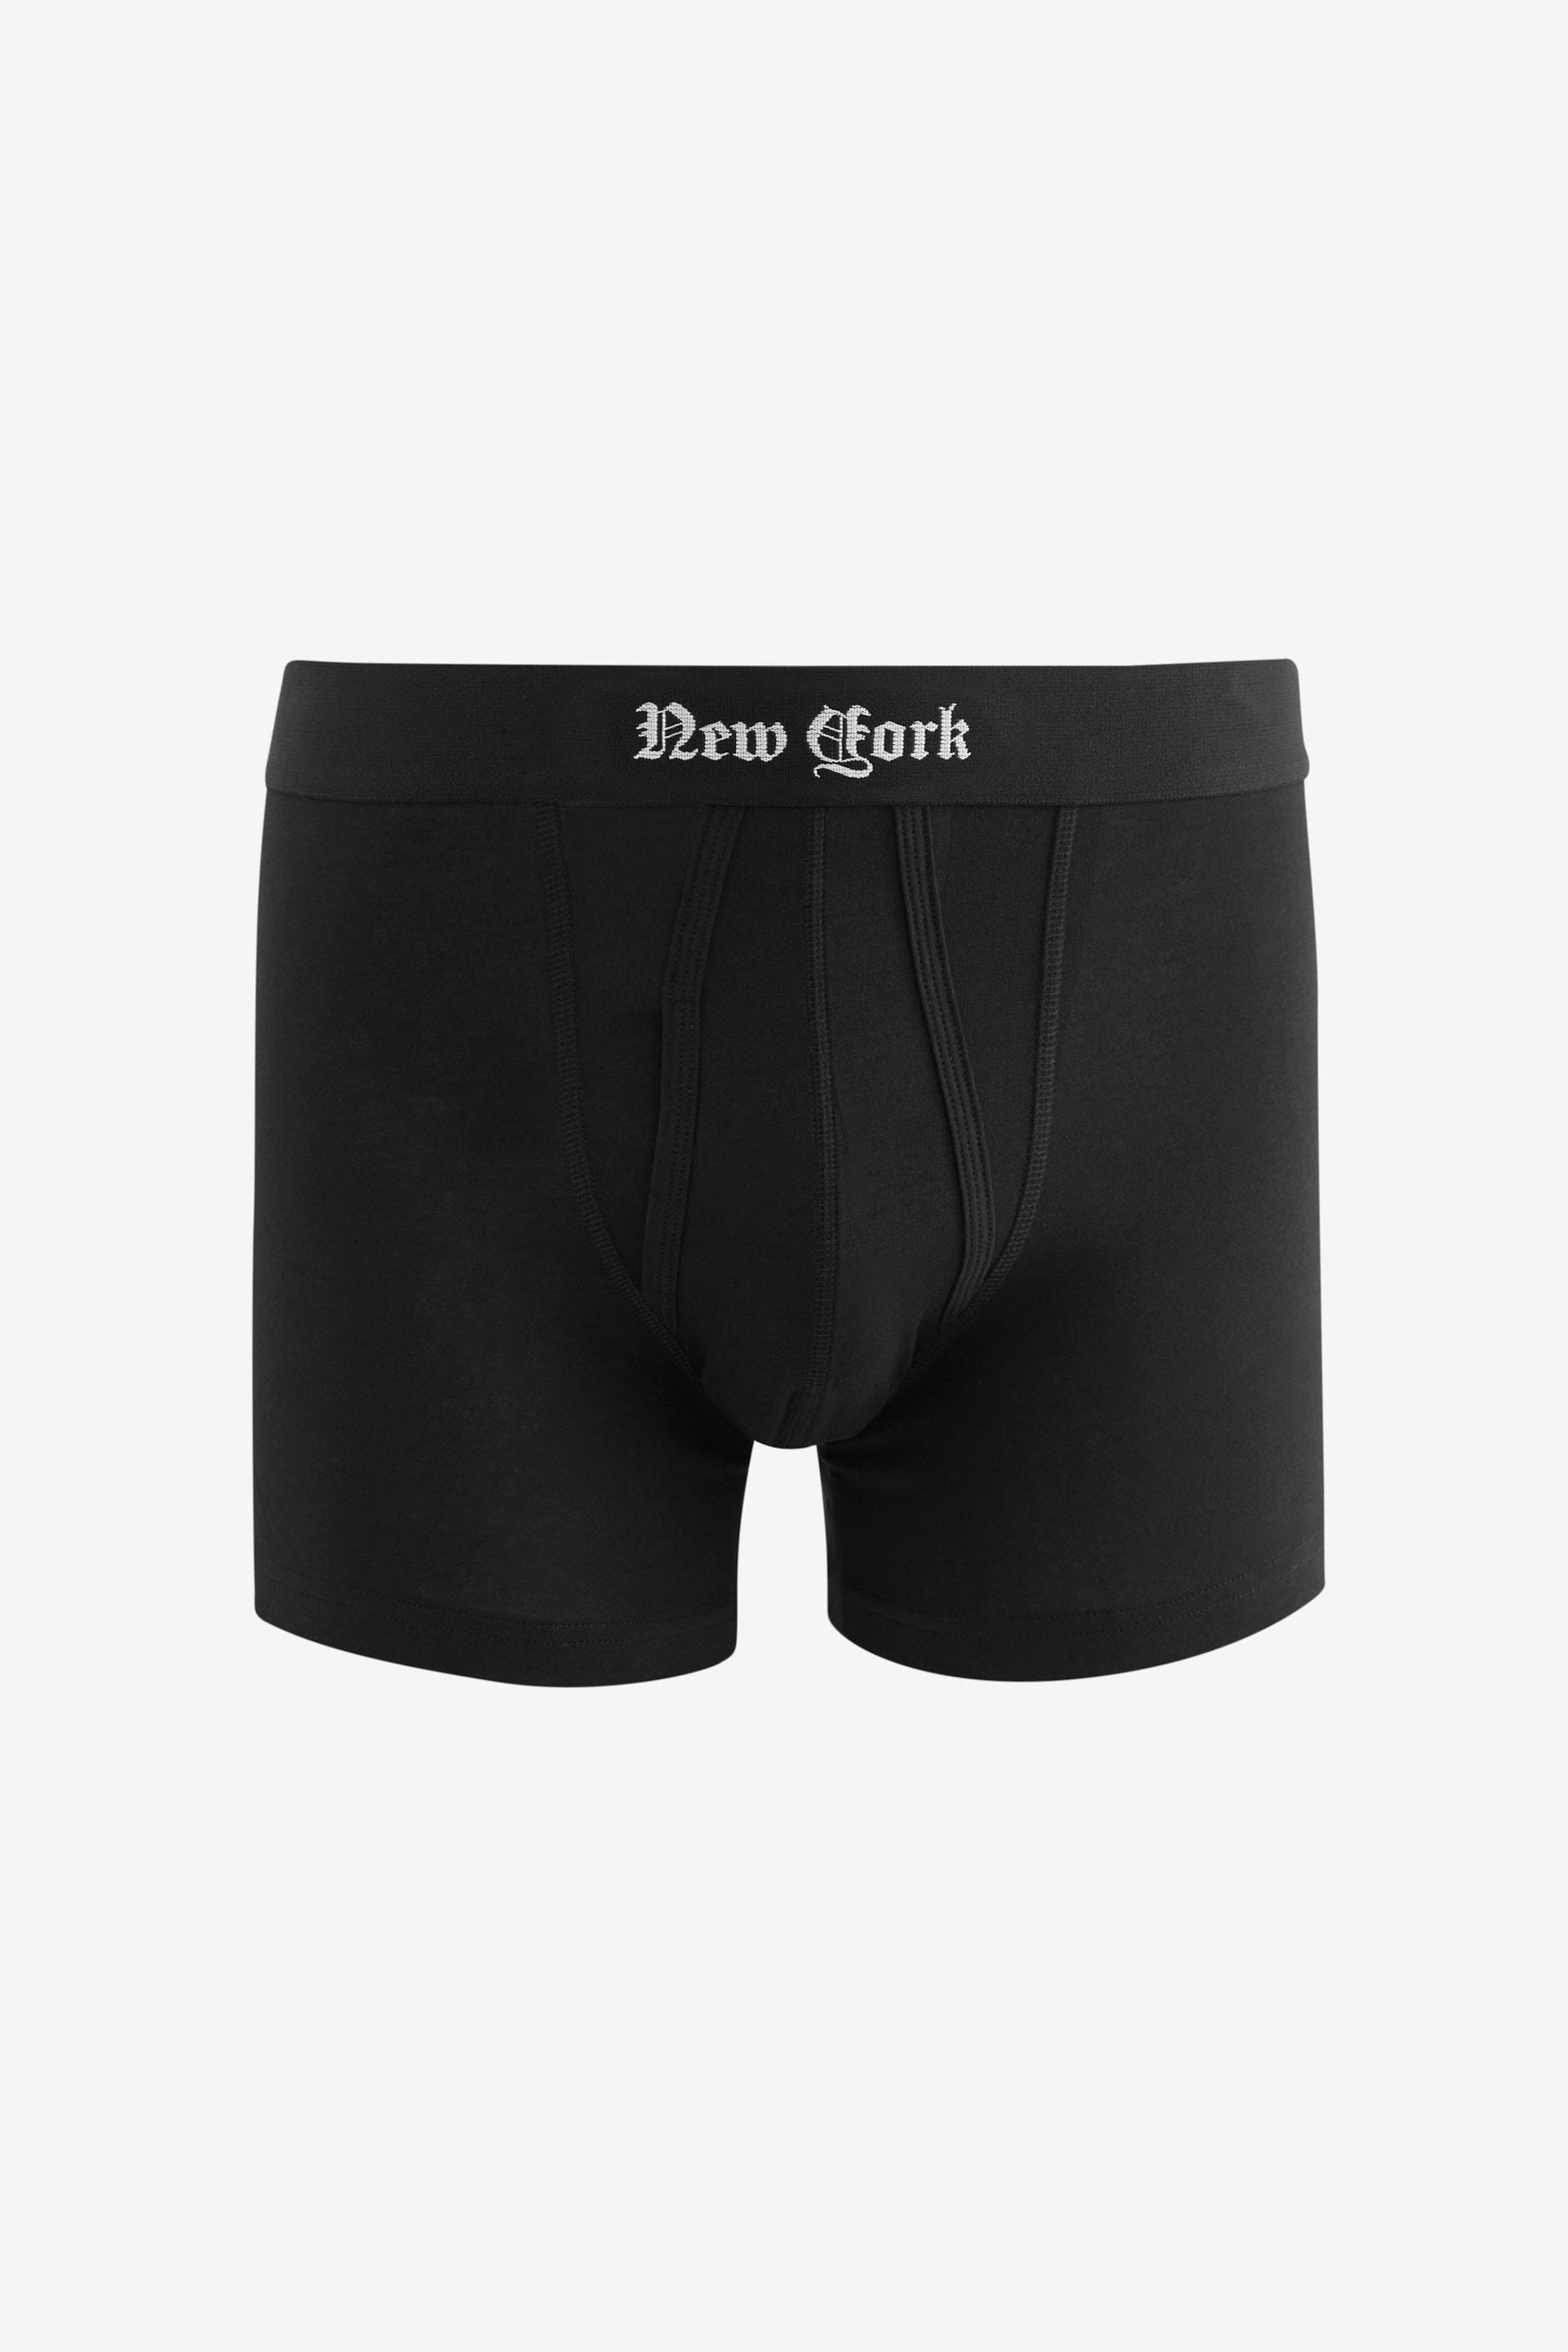 Black City Names Waistband 4 pack A-Front Boxers - Image 3 of 7